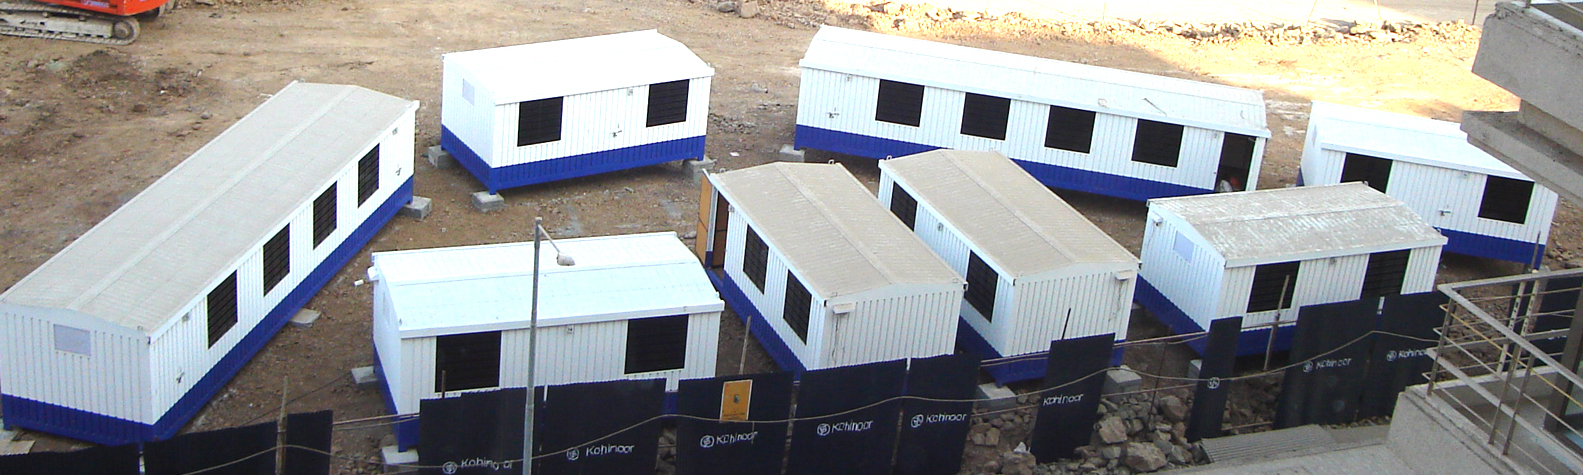 portable cabins, portable cabin manufacturer mumbai, portable cabin, porta cabin manufacturer india, portable office cabins , prefabricated portable cabins, porta cabins, portable offices, portable office cabin, portable living accommodation mumbai, portable living room, portable toilets manufacturer in Mumbai, mobile toilets